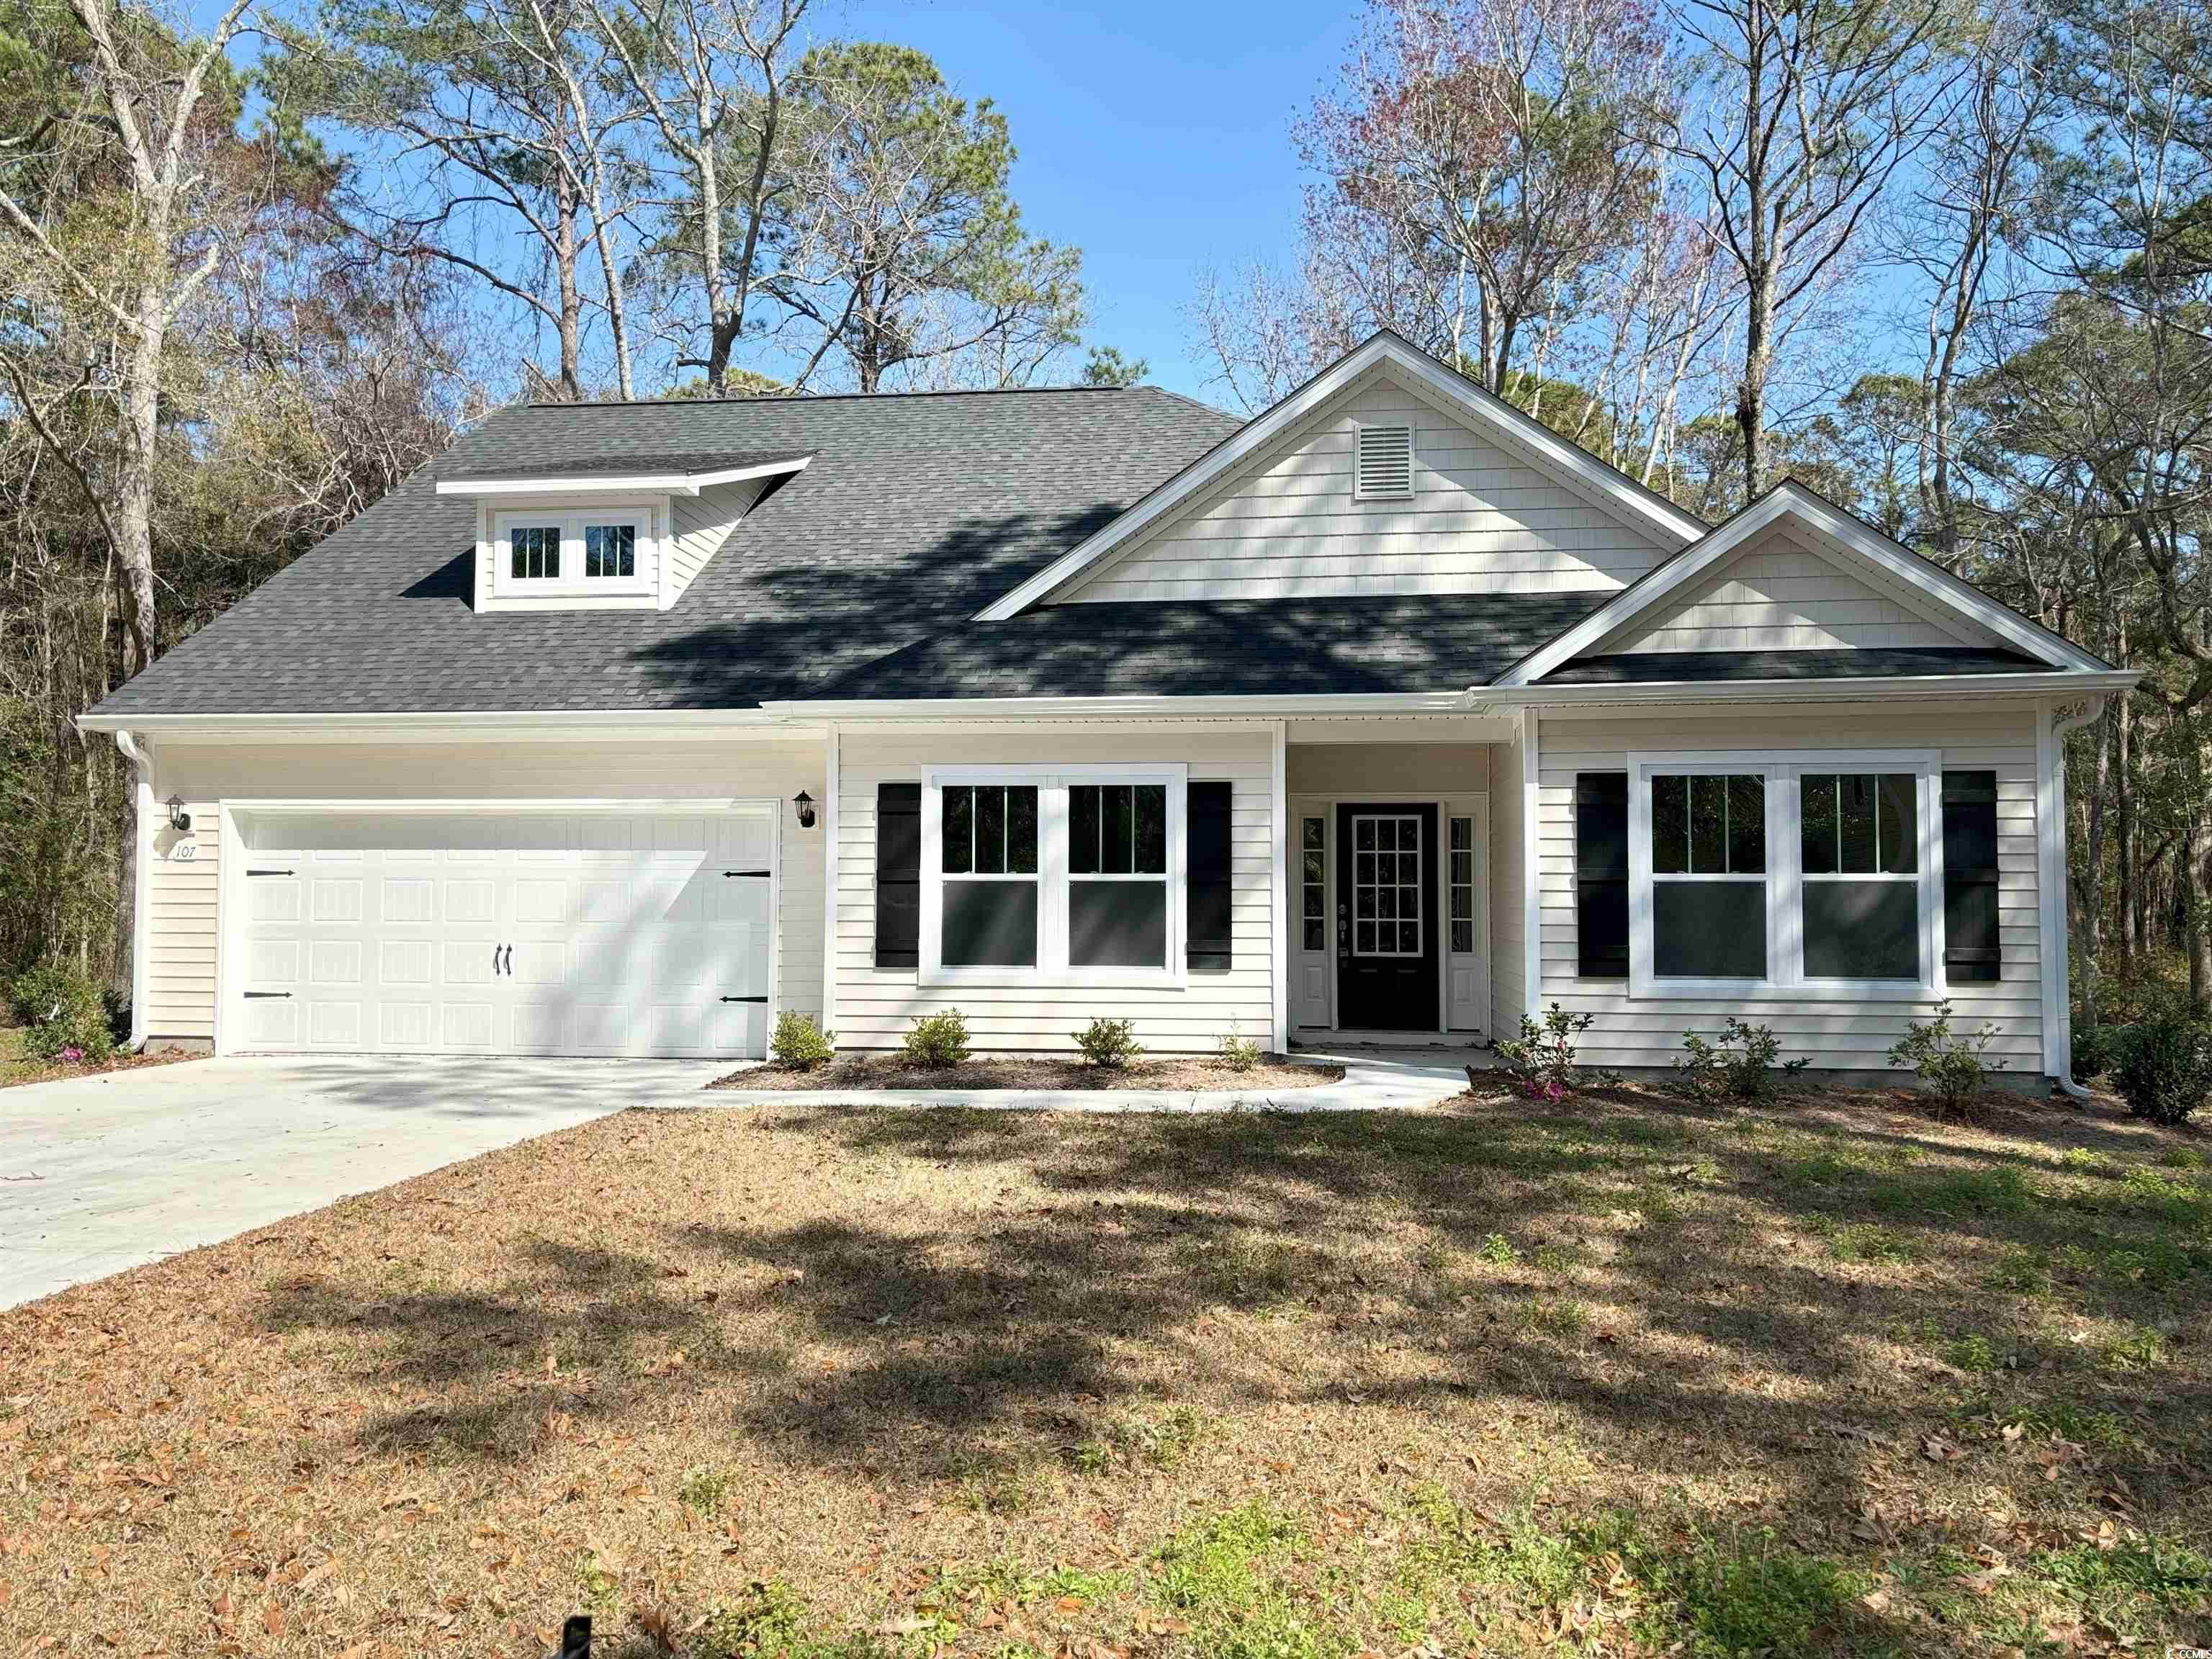 immerse yourself in the serene natural surroundings of this newly built home, ready for you to move in! with trees enveloping three sides, you'll enjoy privacy and a peaceful atmosphere. this open concept, 4-bedroom, 3-bathroom home features a 2-car garage and offers ample relaxation and comfort. conveniently located near pawleys island historic district. explore the marsh or 1st street beach access with your golf cart, marsh/beach lovers will be delighted. golf enthusiasts will appreciate the quick 2-minute drive to pawleys plantation golf and country club, true blue golf club, and other golfing options. easily access publix shopping center, brookgreen gardens, huntington beach state park, and more!  step inside to discover luxury vinyl plank flooring, granite countertops, and elegant touches throughout. the master bedroom boasts spaciousness and double stepped tray ceilings, while the master bath offers easy-to-clean tile walls with a fiberglass base shower, ada hi-boy toilet, and separated double vanities. the living room showcases unique double stepped tray ceilings with recessed lighting for added elegance. with ample storage space, you'll have room for all your belongings. the second floor features a large private suite for guests or a home office. relax in the private backyard on the spacious screened-in covered porch with a cup of coffee or tea or just for entertaining guests! don't miss out on this exceptional property! measurements are approximate and buyer verification is required.